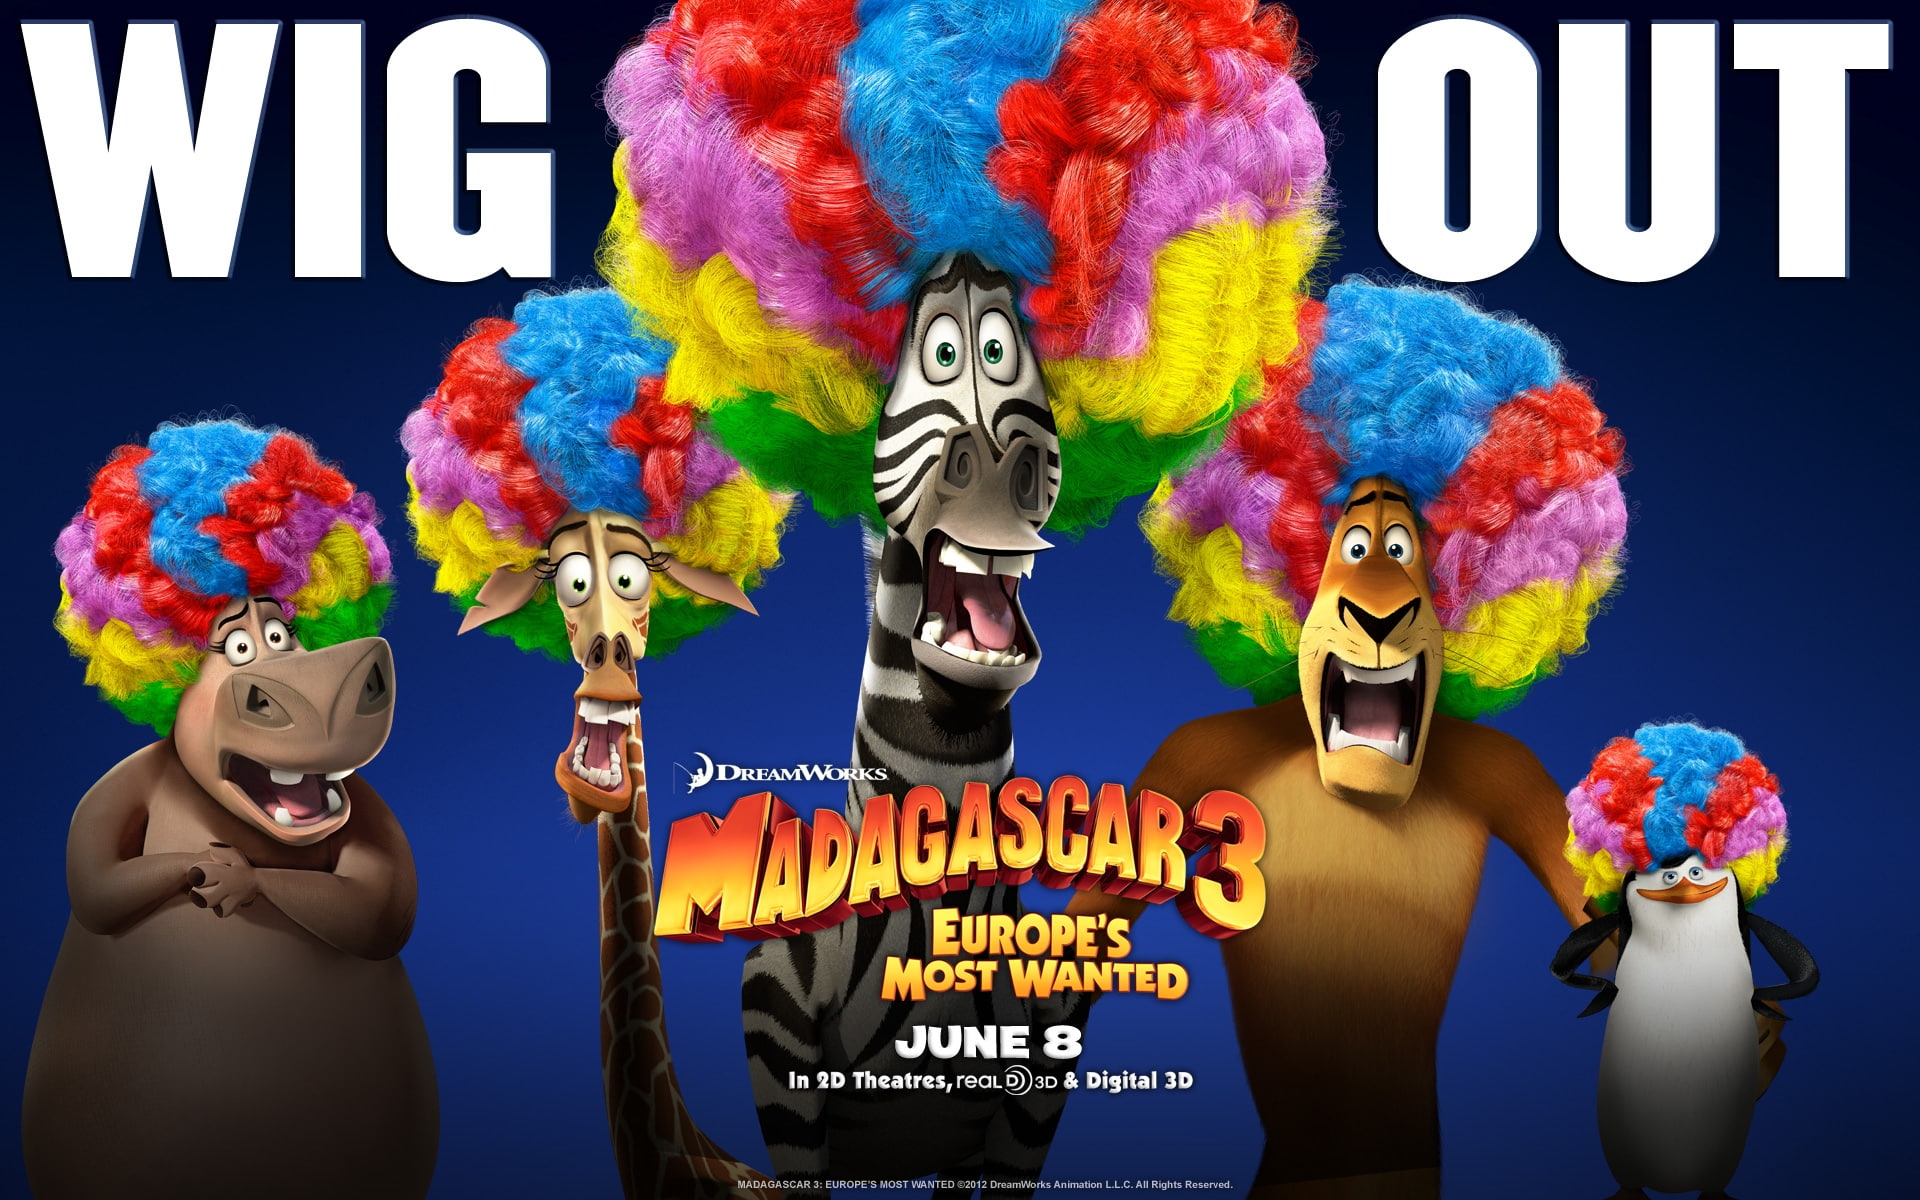 Madagascar 3, wig out madagascar 3 europe's most wanted